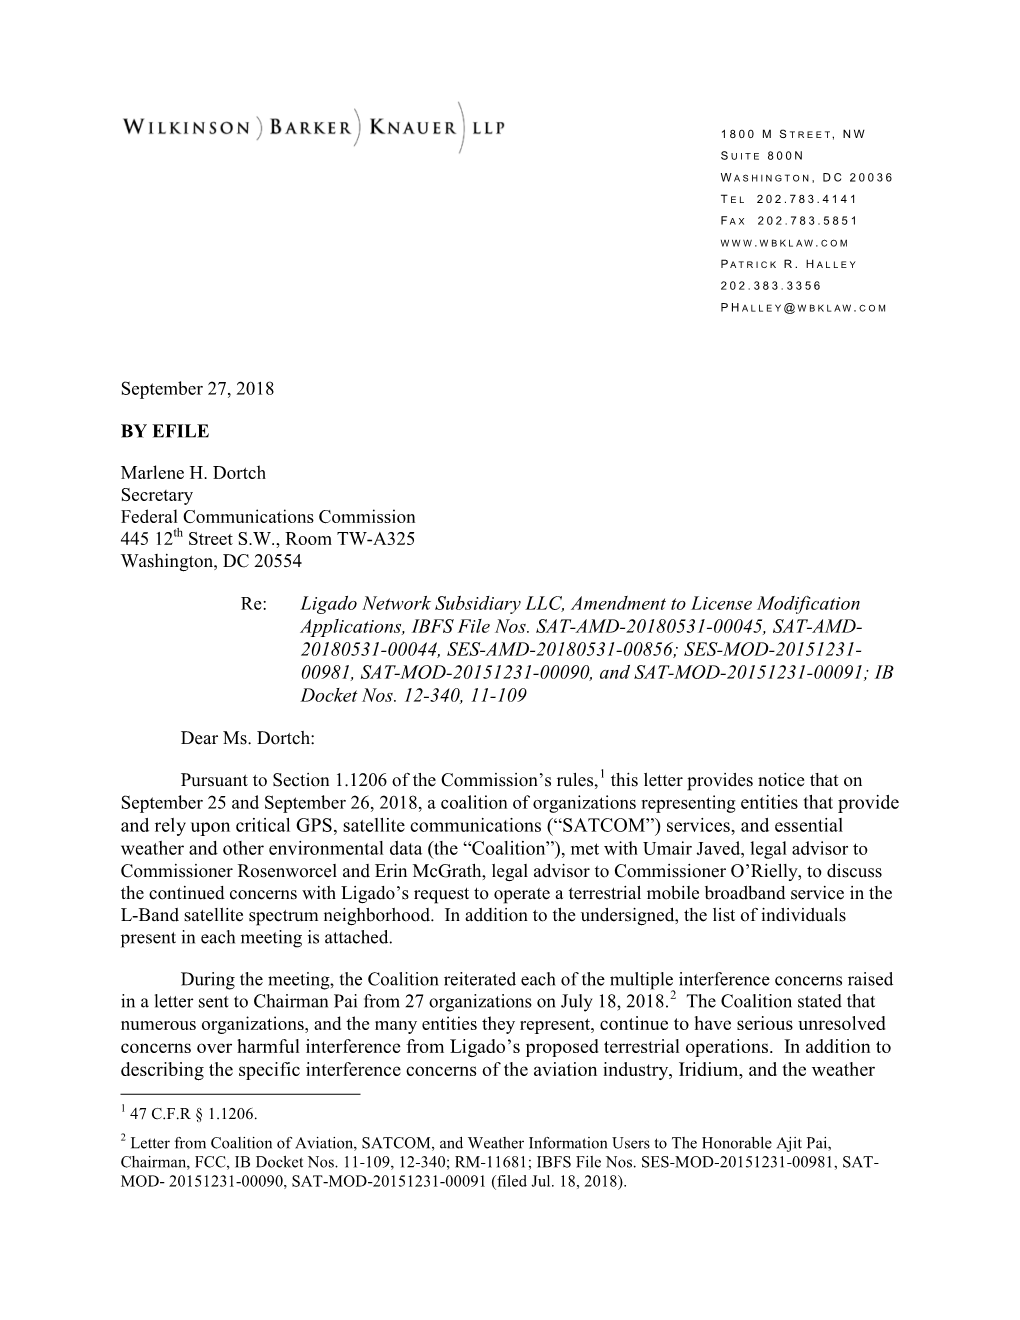 Multi-Organization Ex Parte Submission to FCC on Use Of